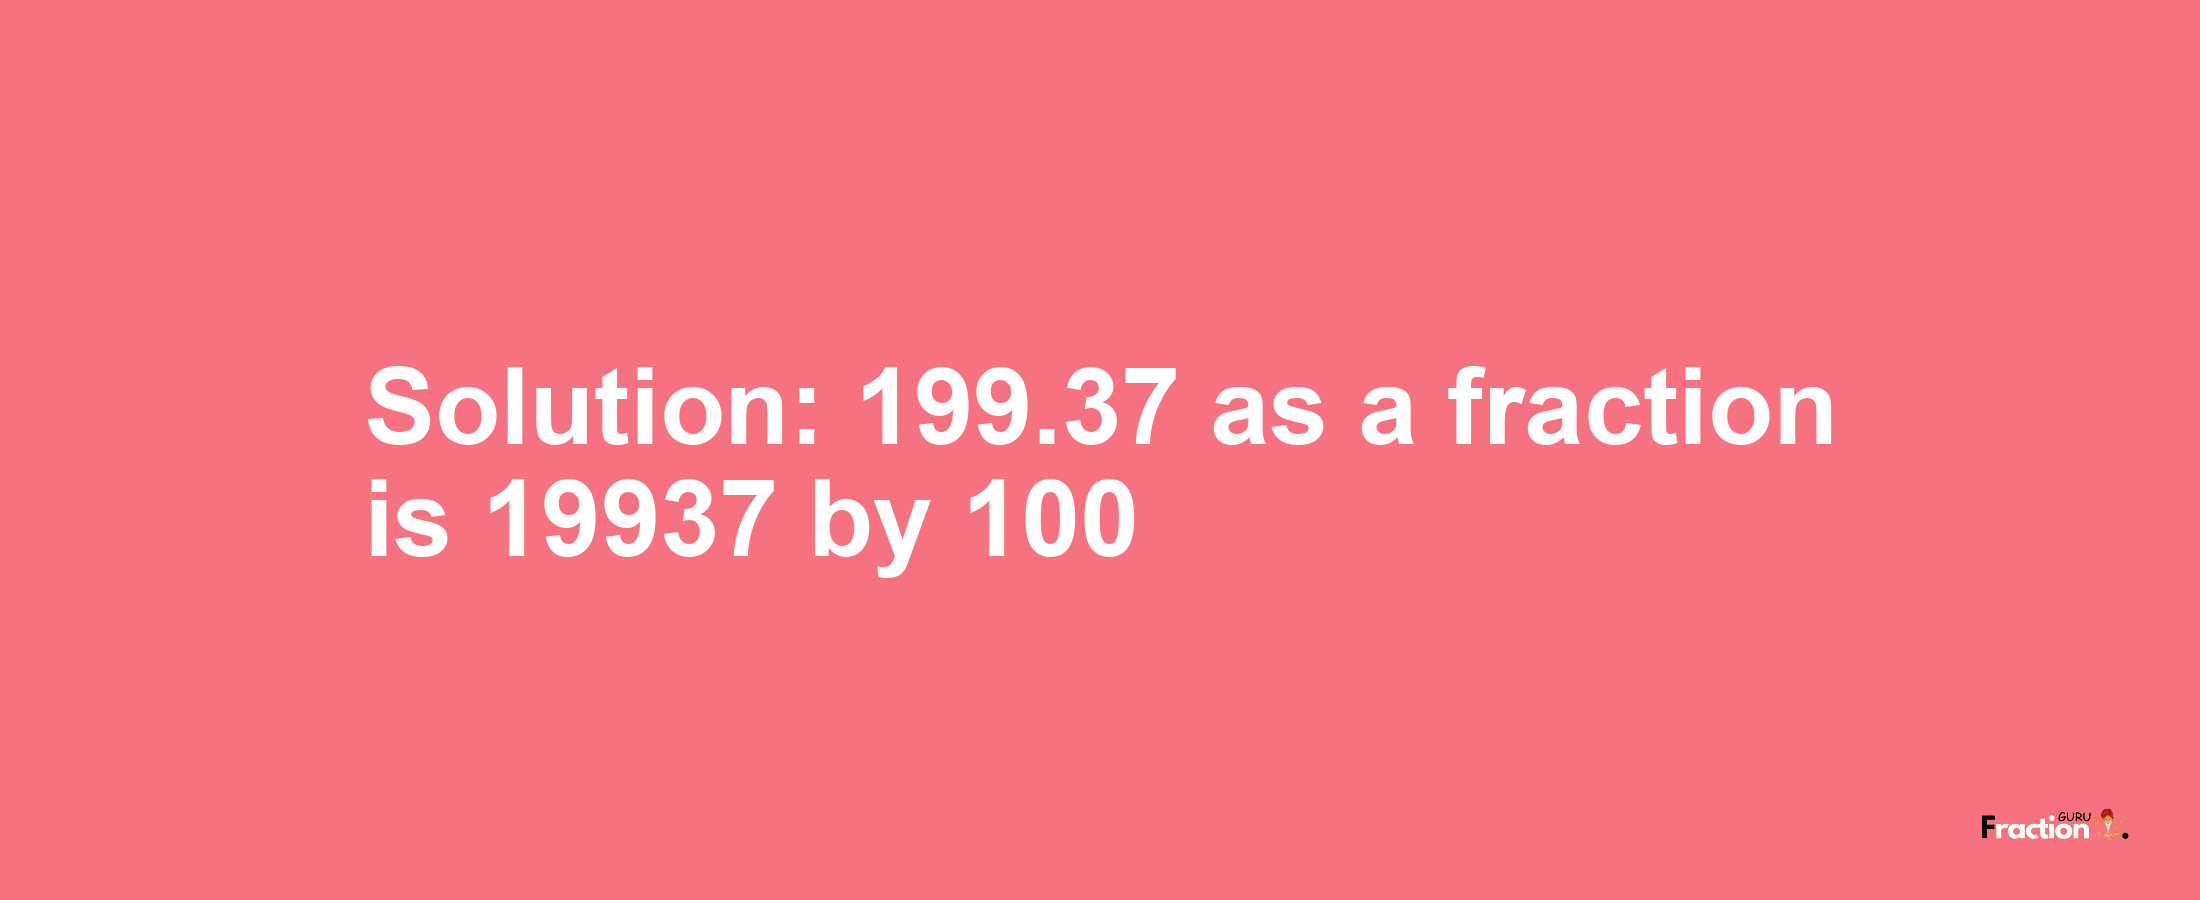 Solution:199.37 as a fraction is 19937/100